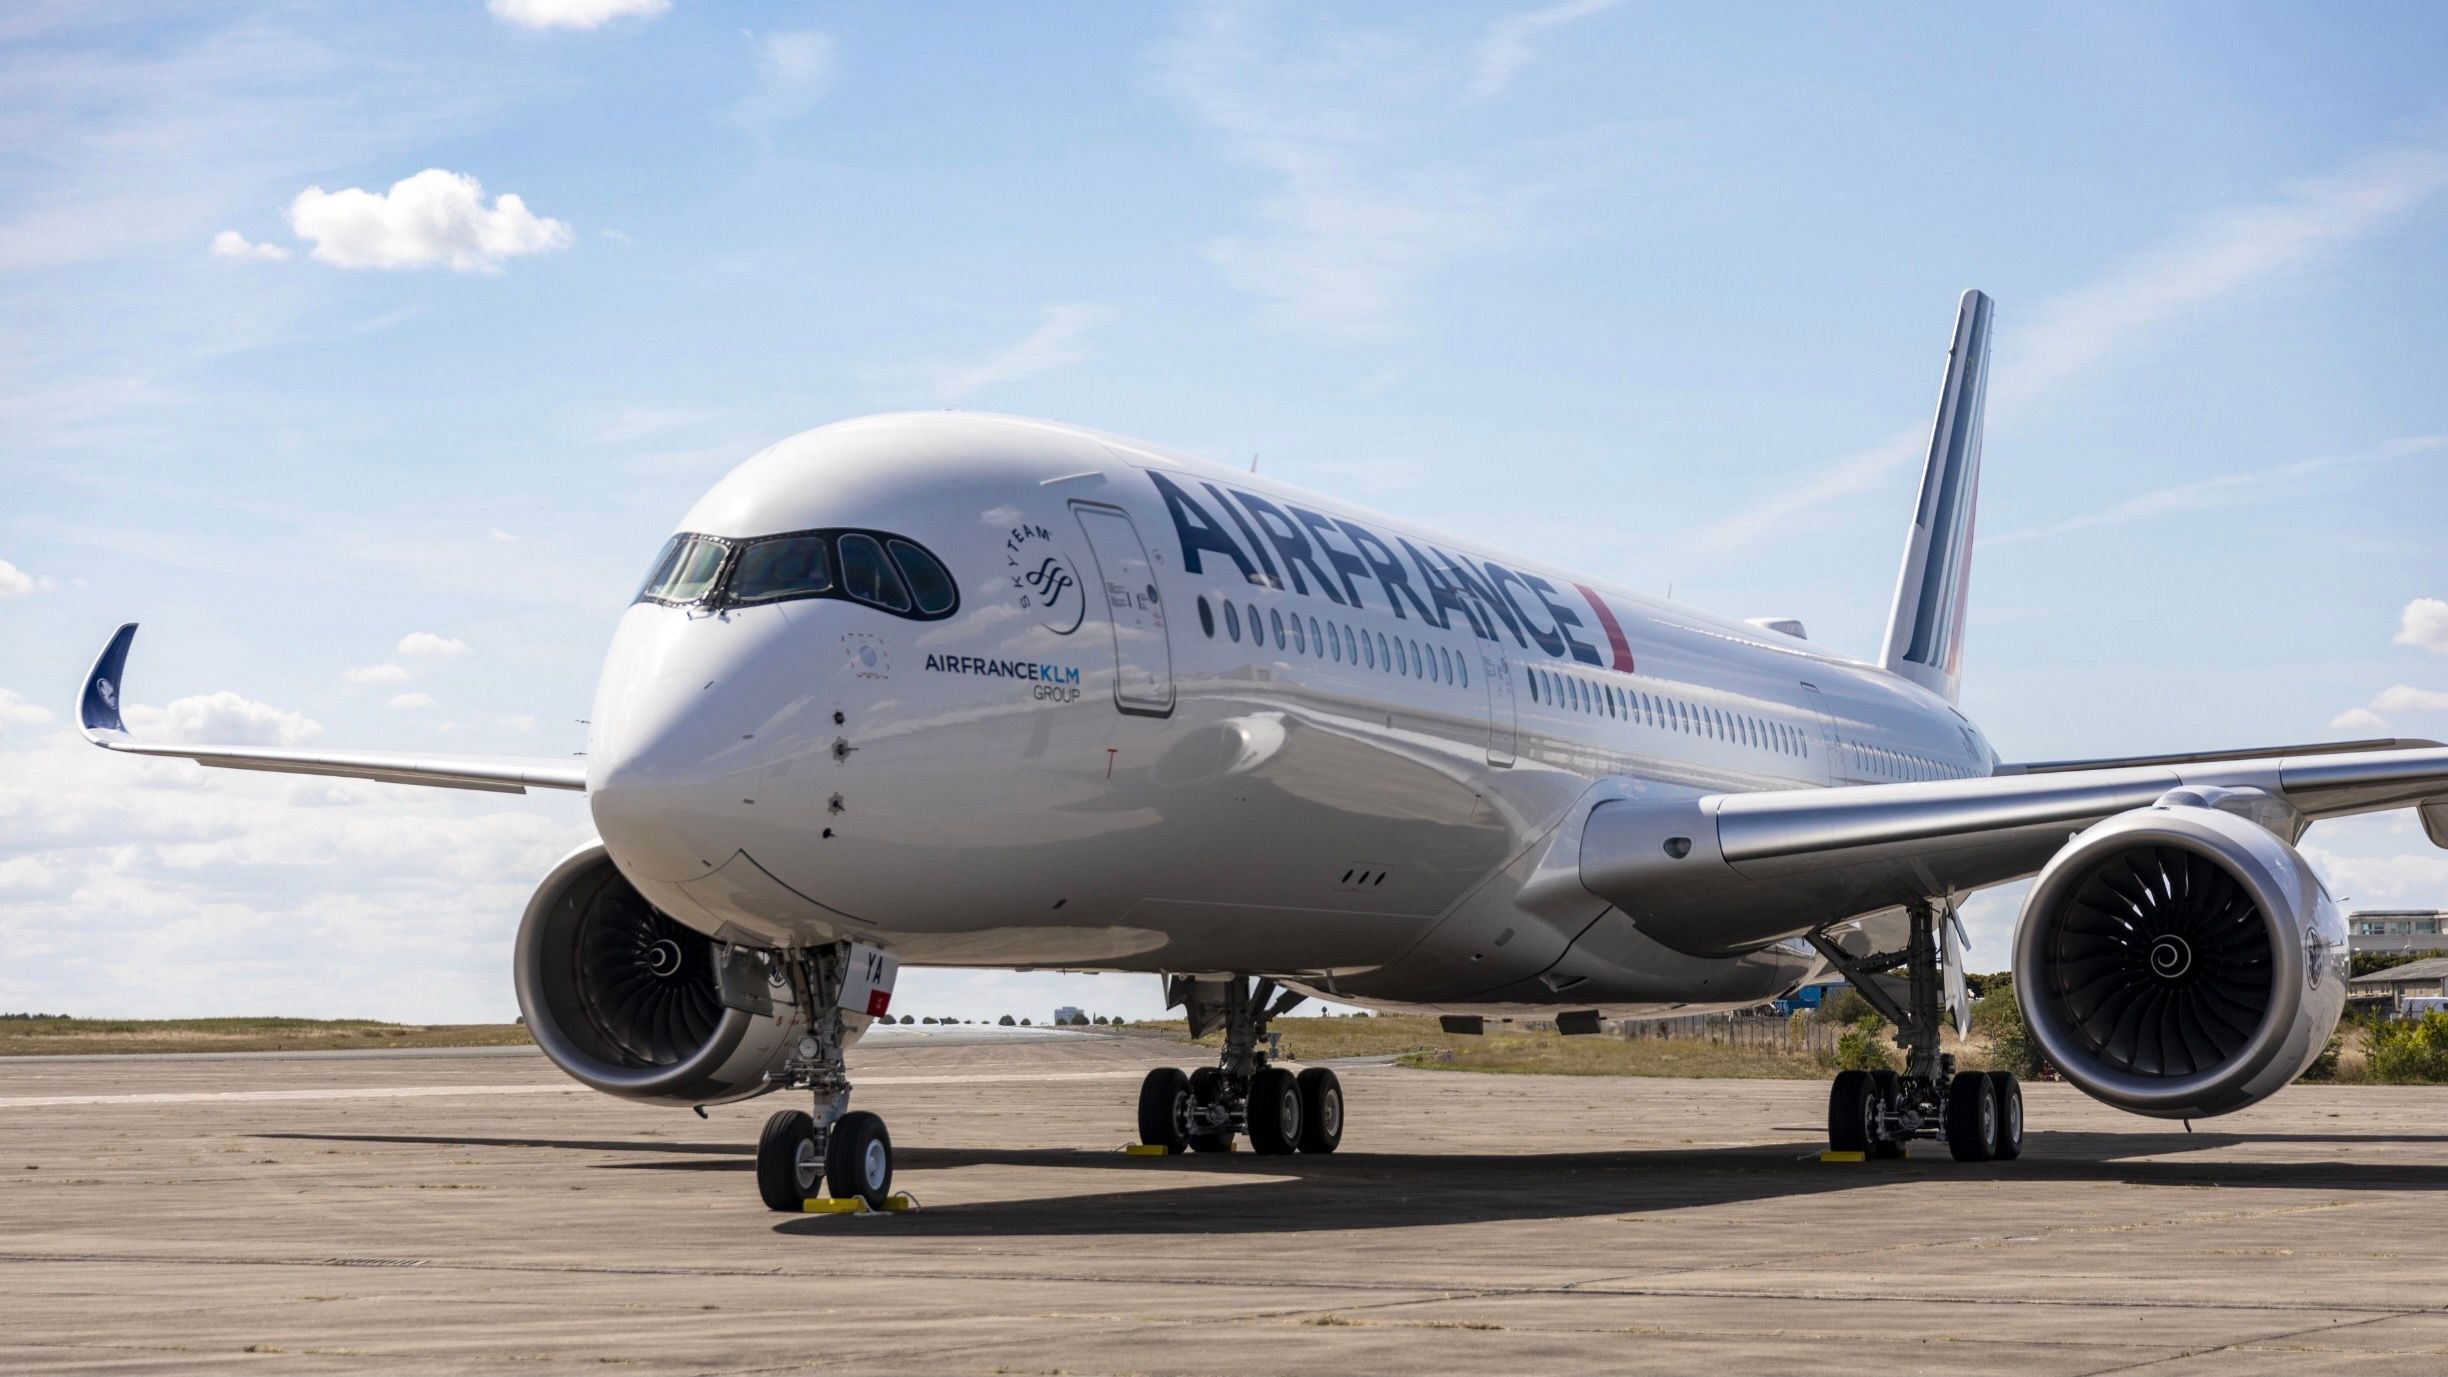 Toronto Tailstrike: Air France Airbus A350 Damaged During Go Around